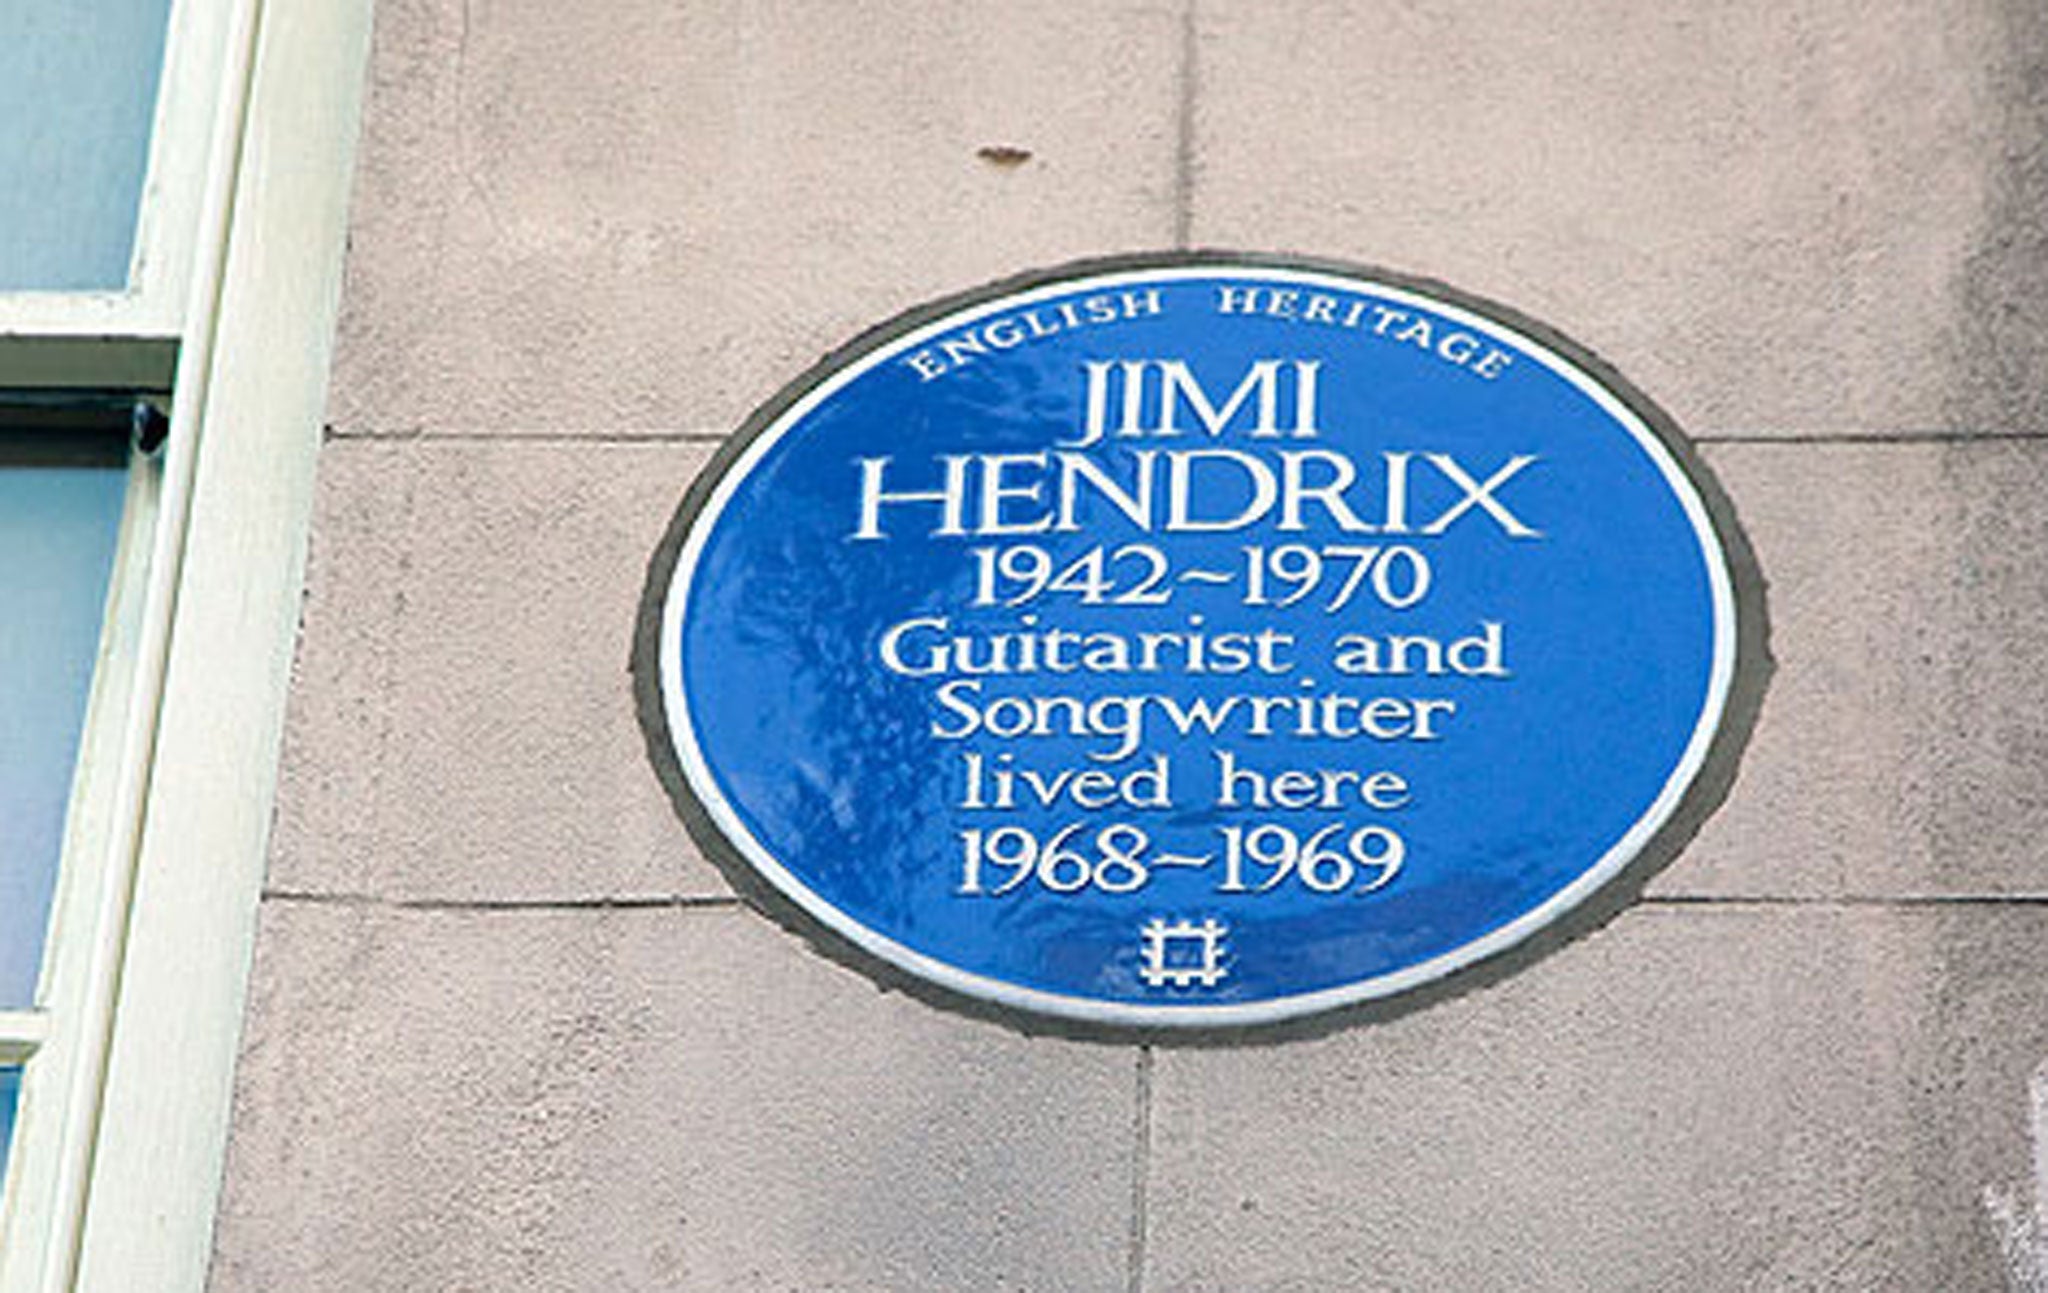 Guitarist and songwriter Jimi Hendrix is one black figure who is remembered with a blue plaque